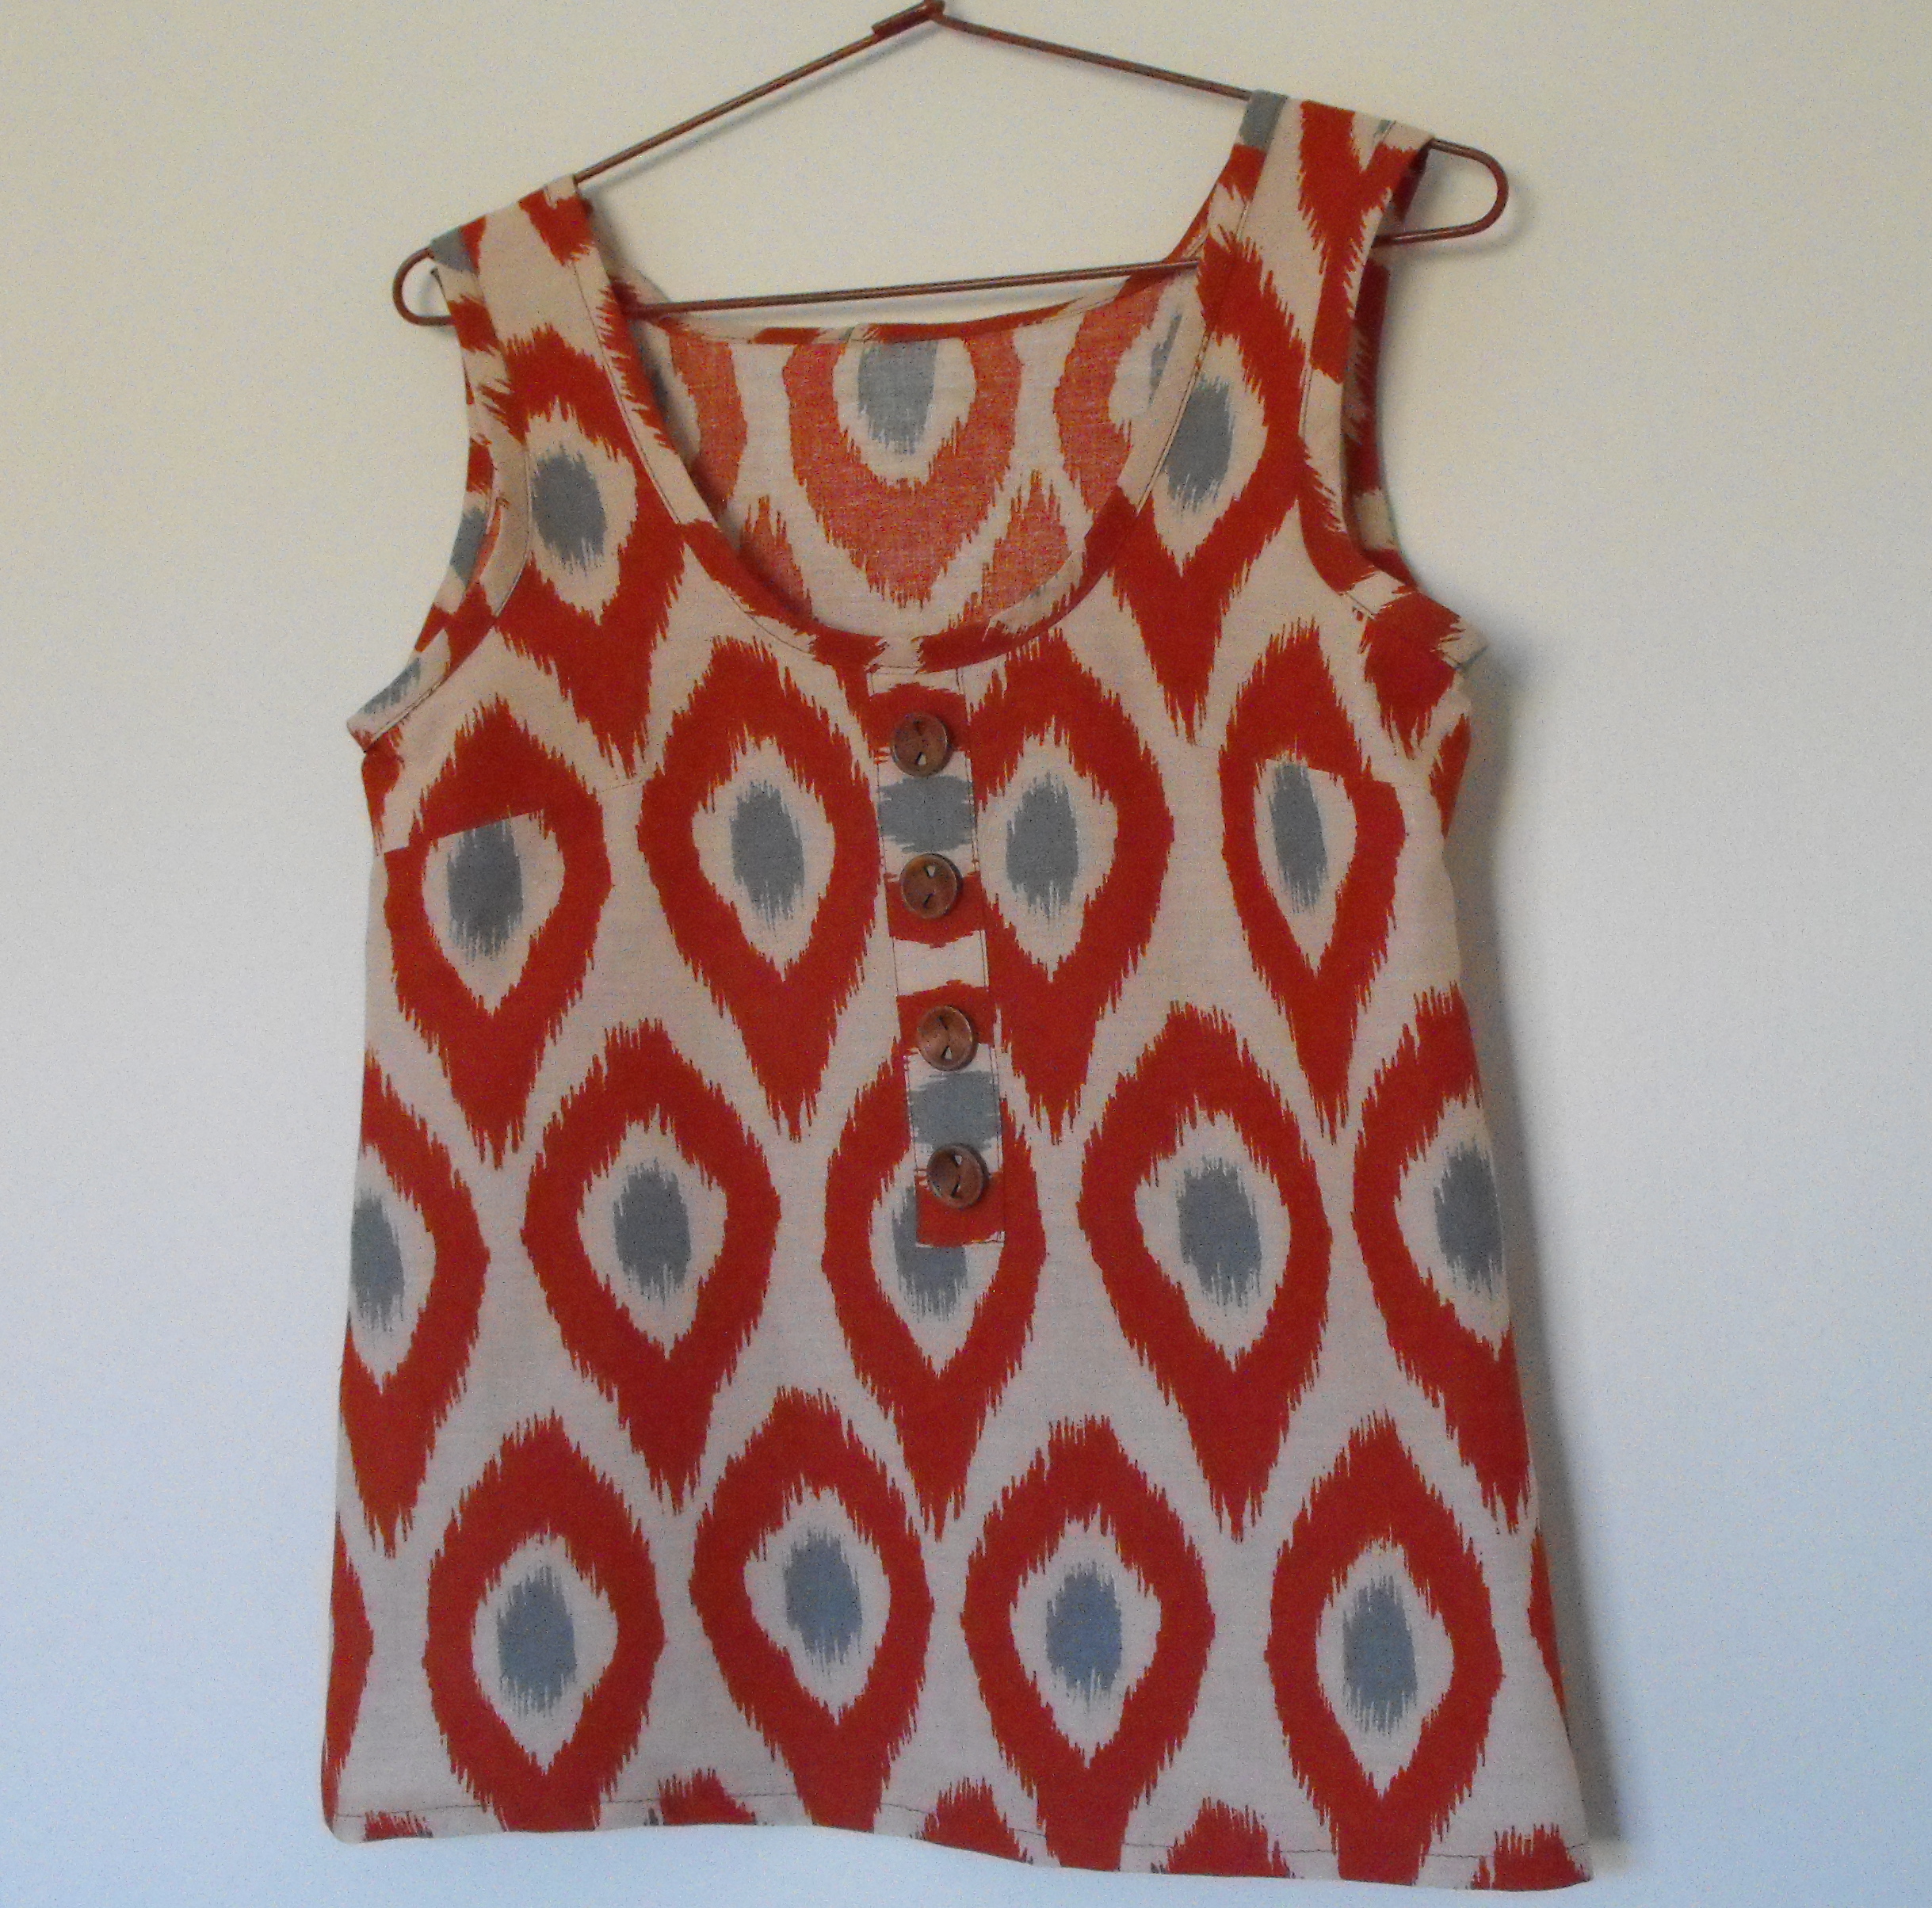 Pillowcase Summer Top – Sewing Projects | BurdaStyle.com